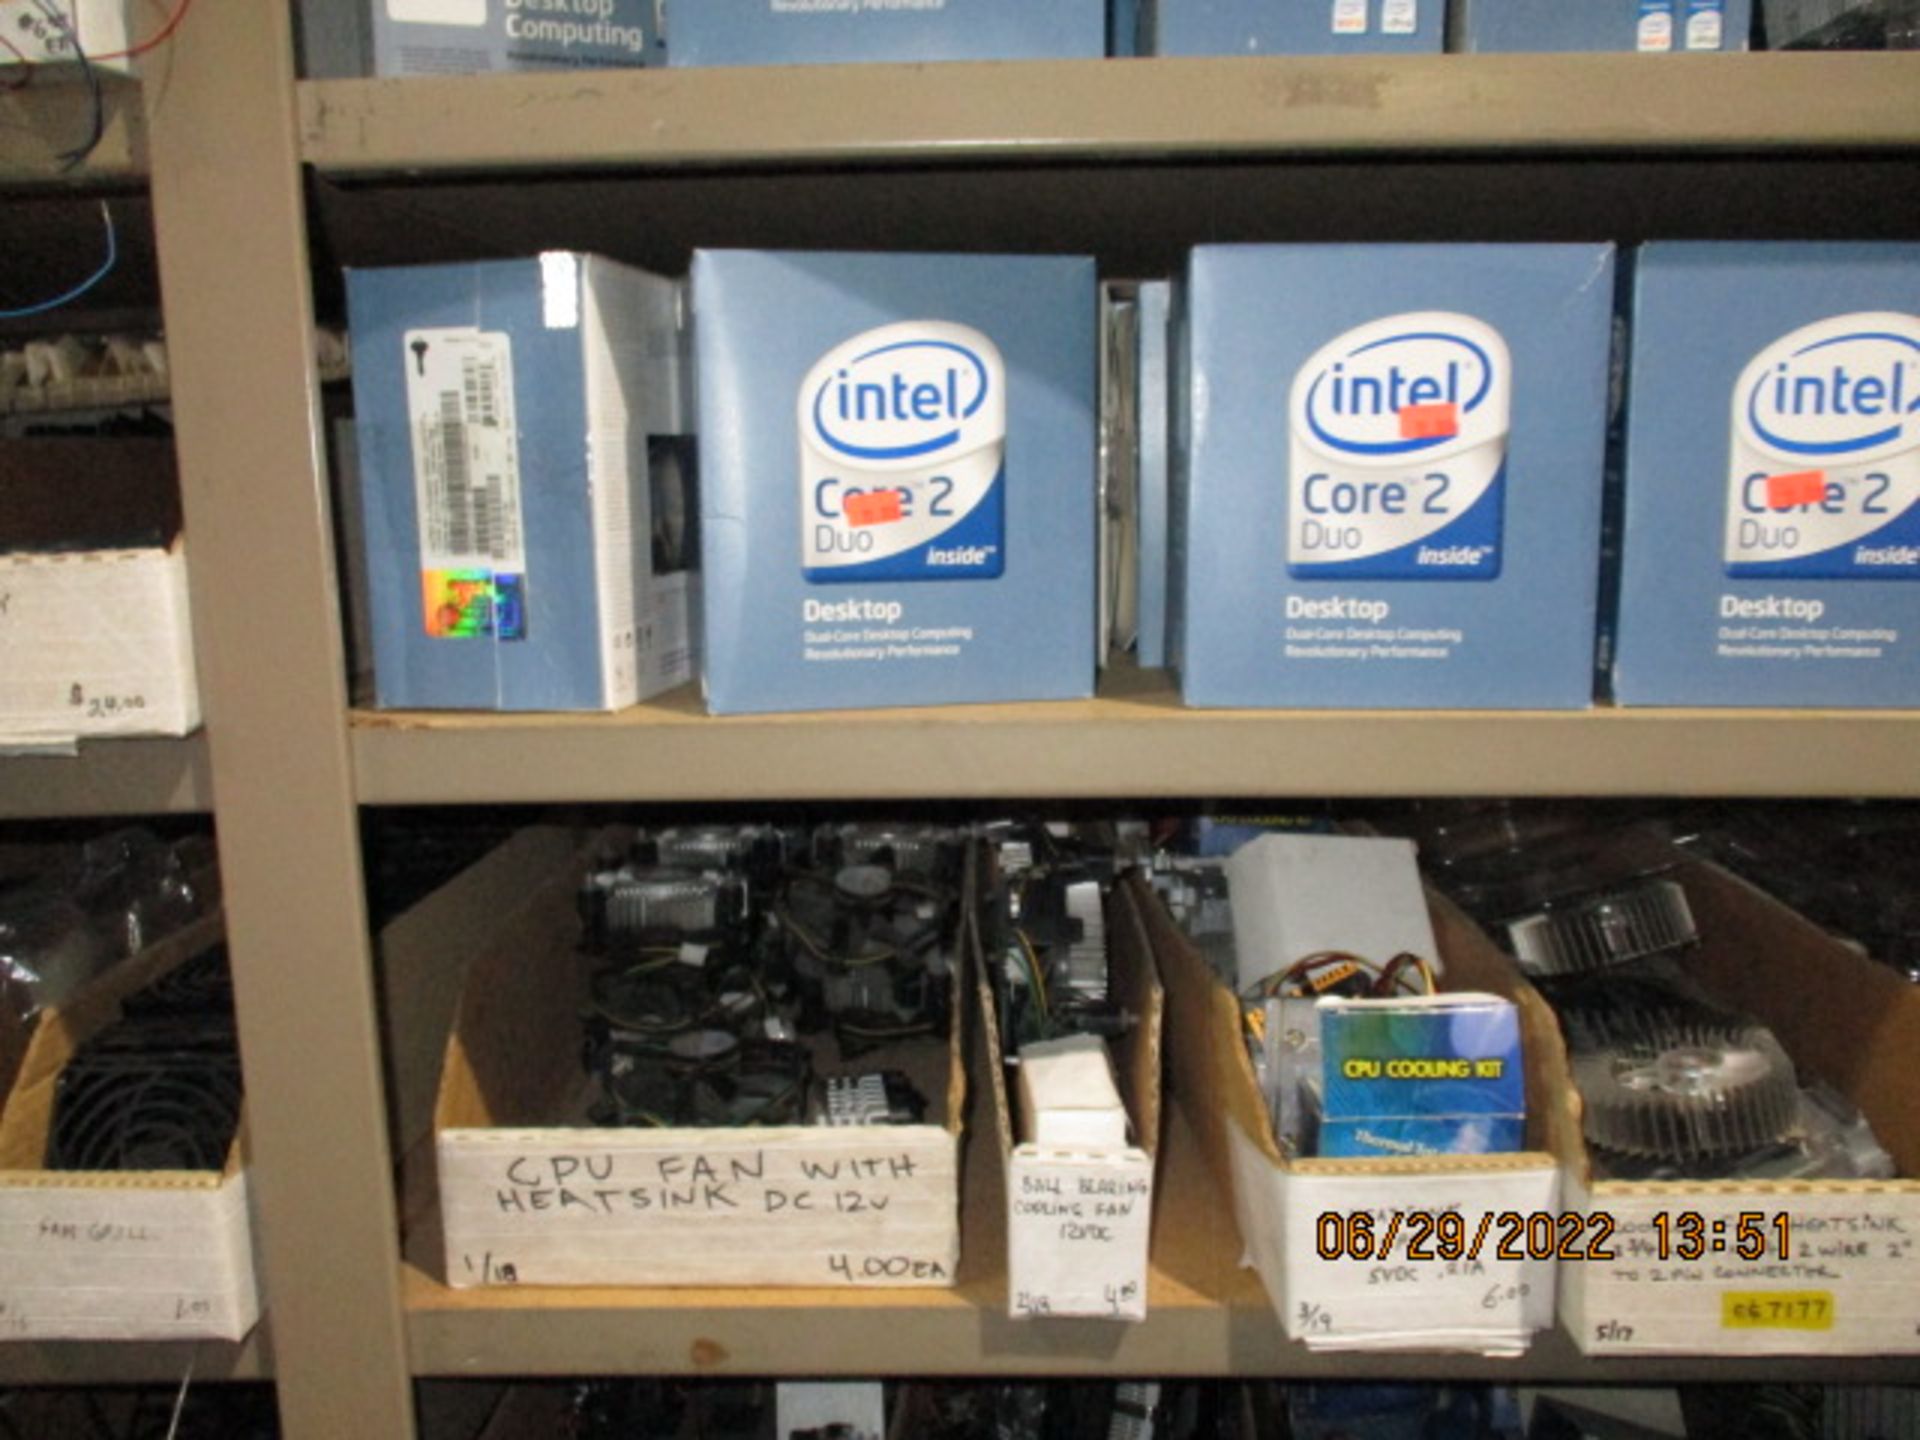 CONTENTS OF SHELVING UNIT CONSISTING OF INTEL CORE 2 DUO DESKTOP AND FANS - Image 4 of 13